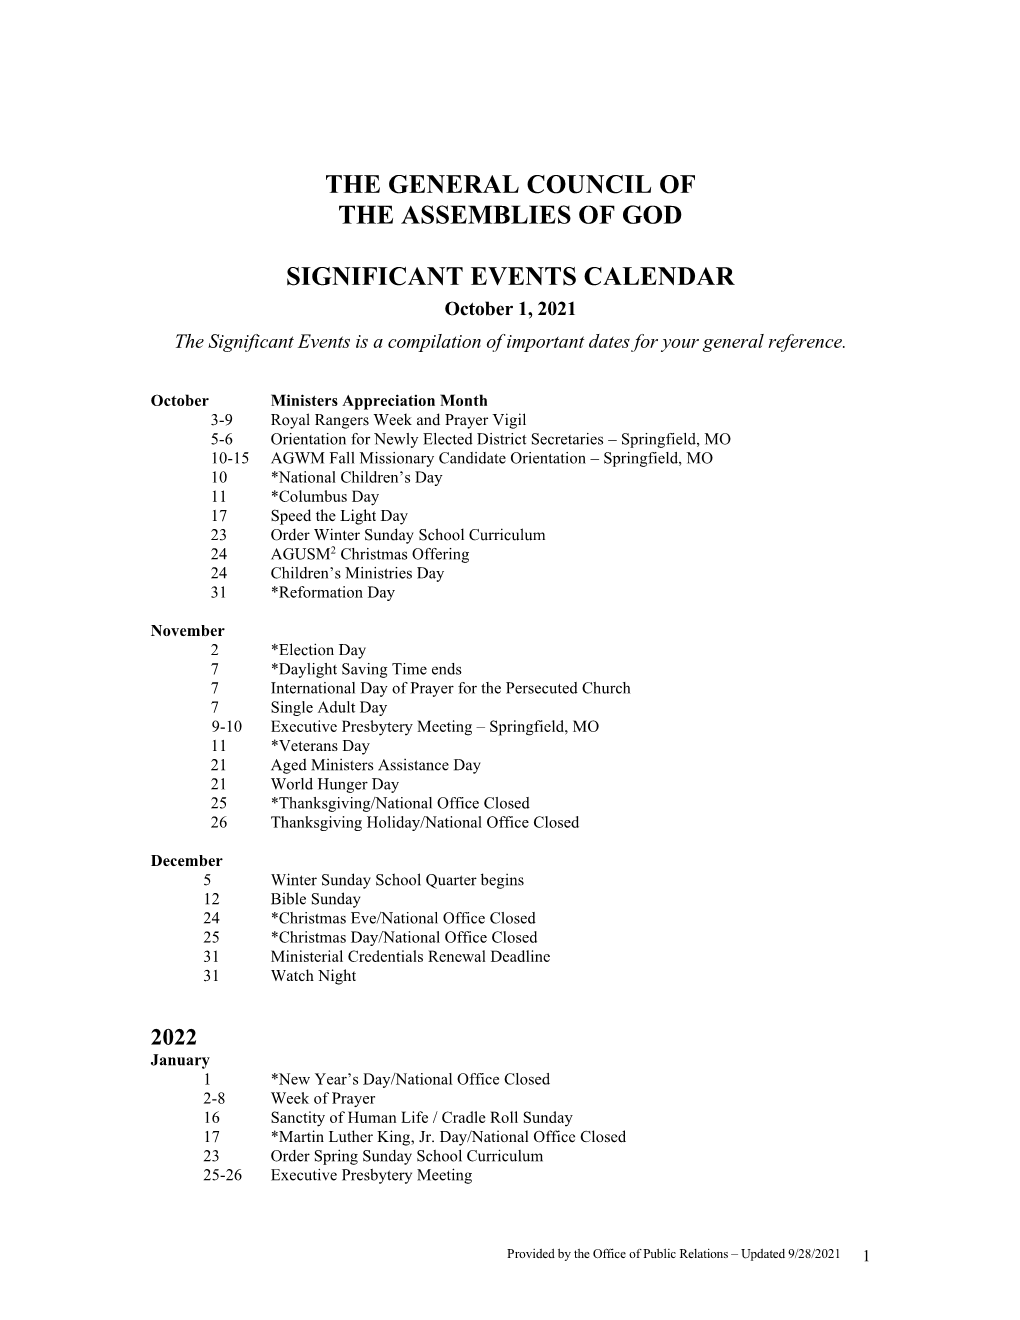 The General Council of the Assemblies of God Significant Events Calendar